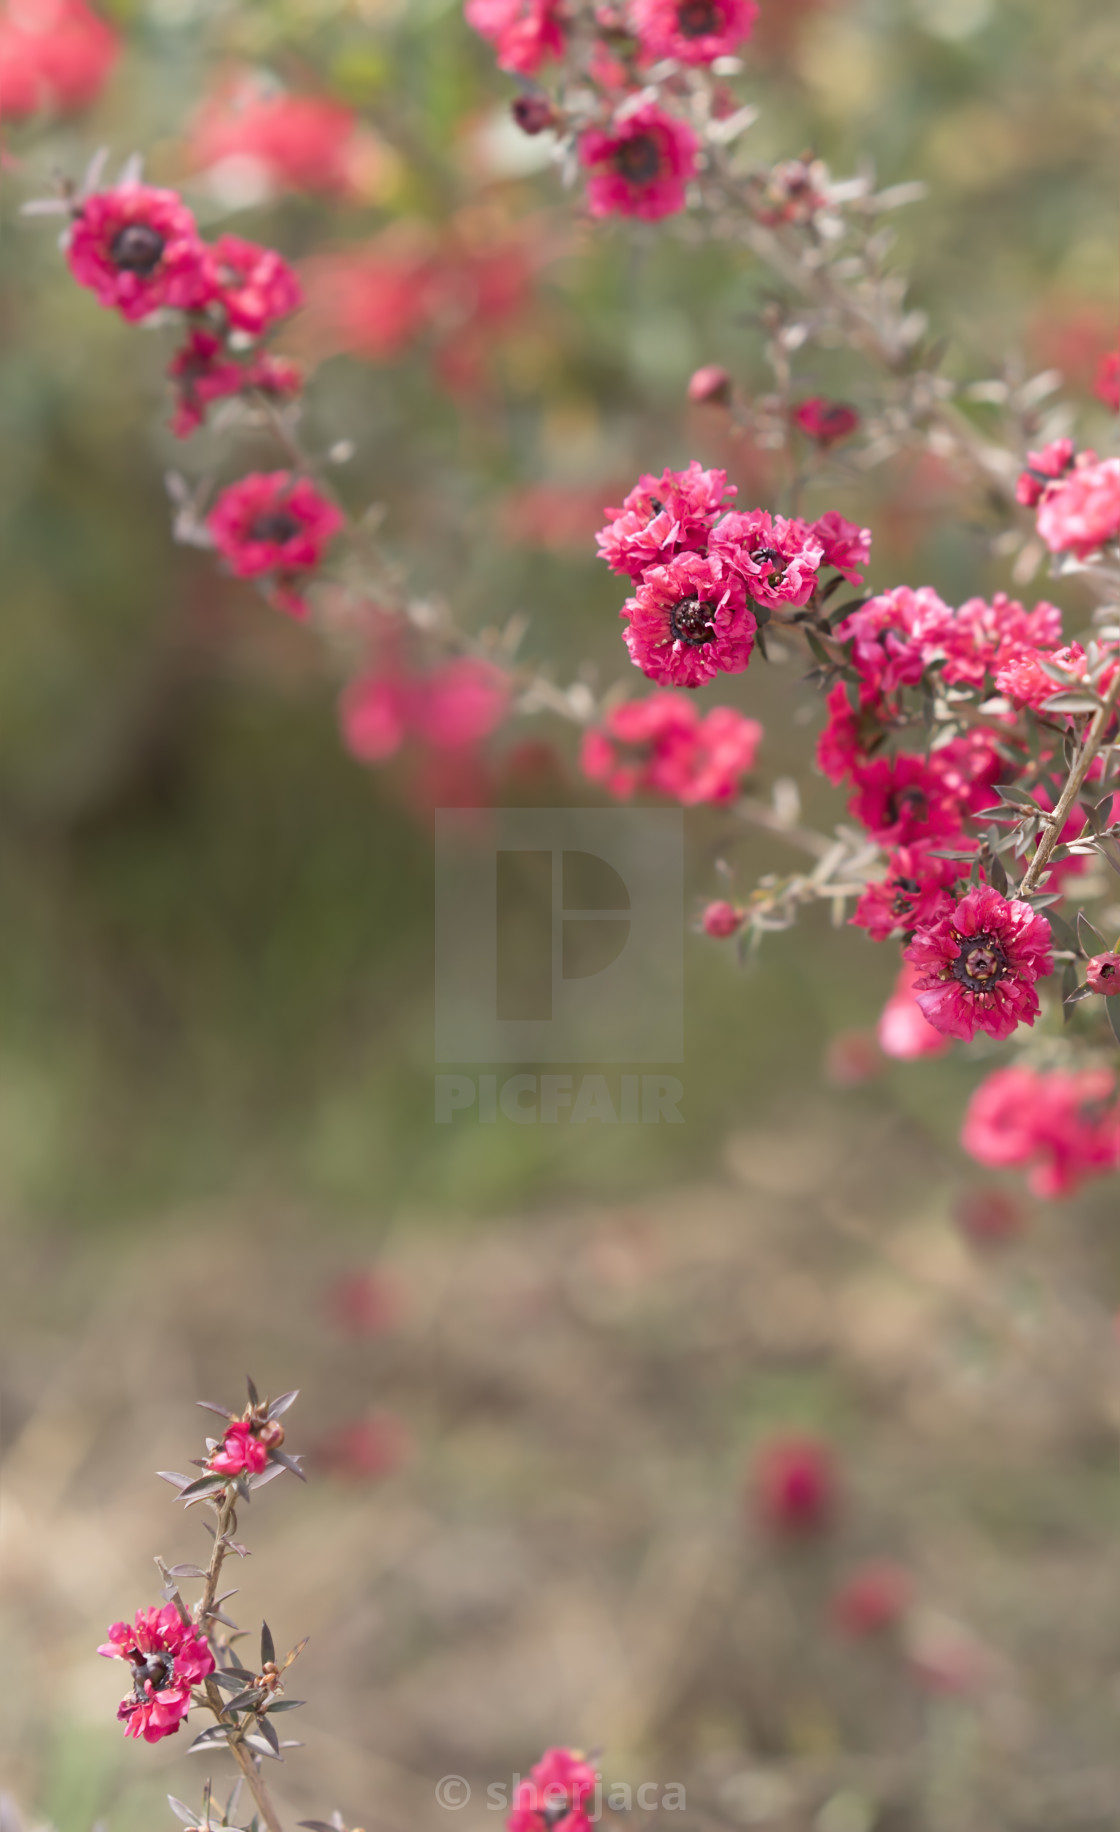 Condolences and sympathy background with pink flowers - License, download  or print for £ | Photos | Picfair